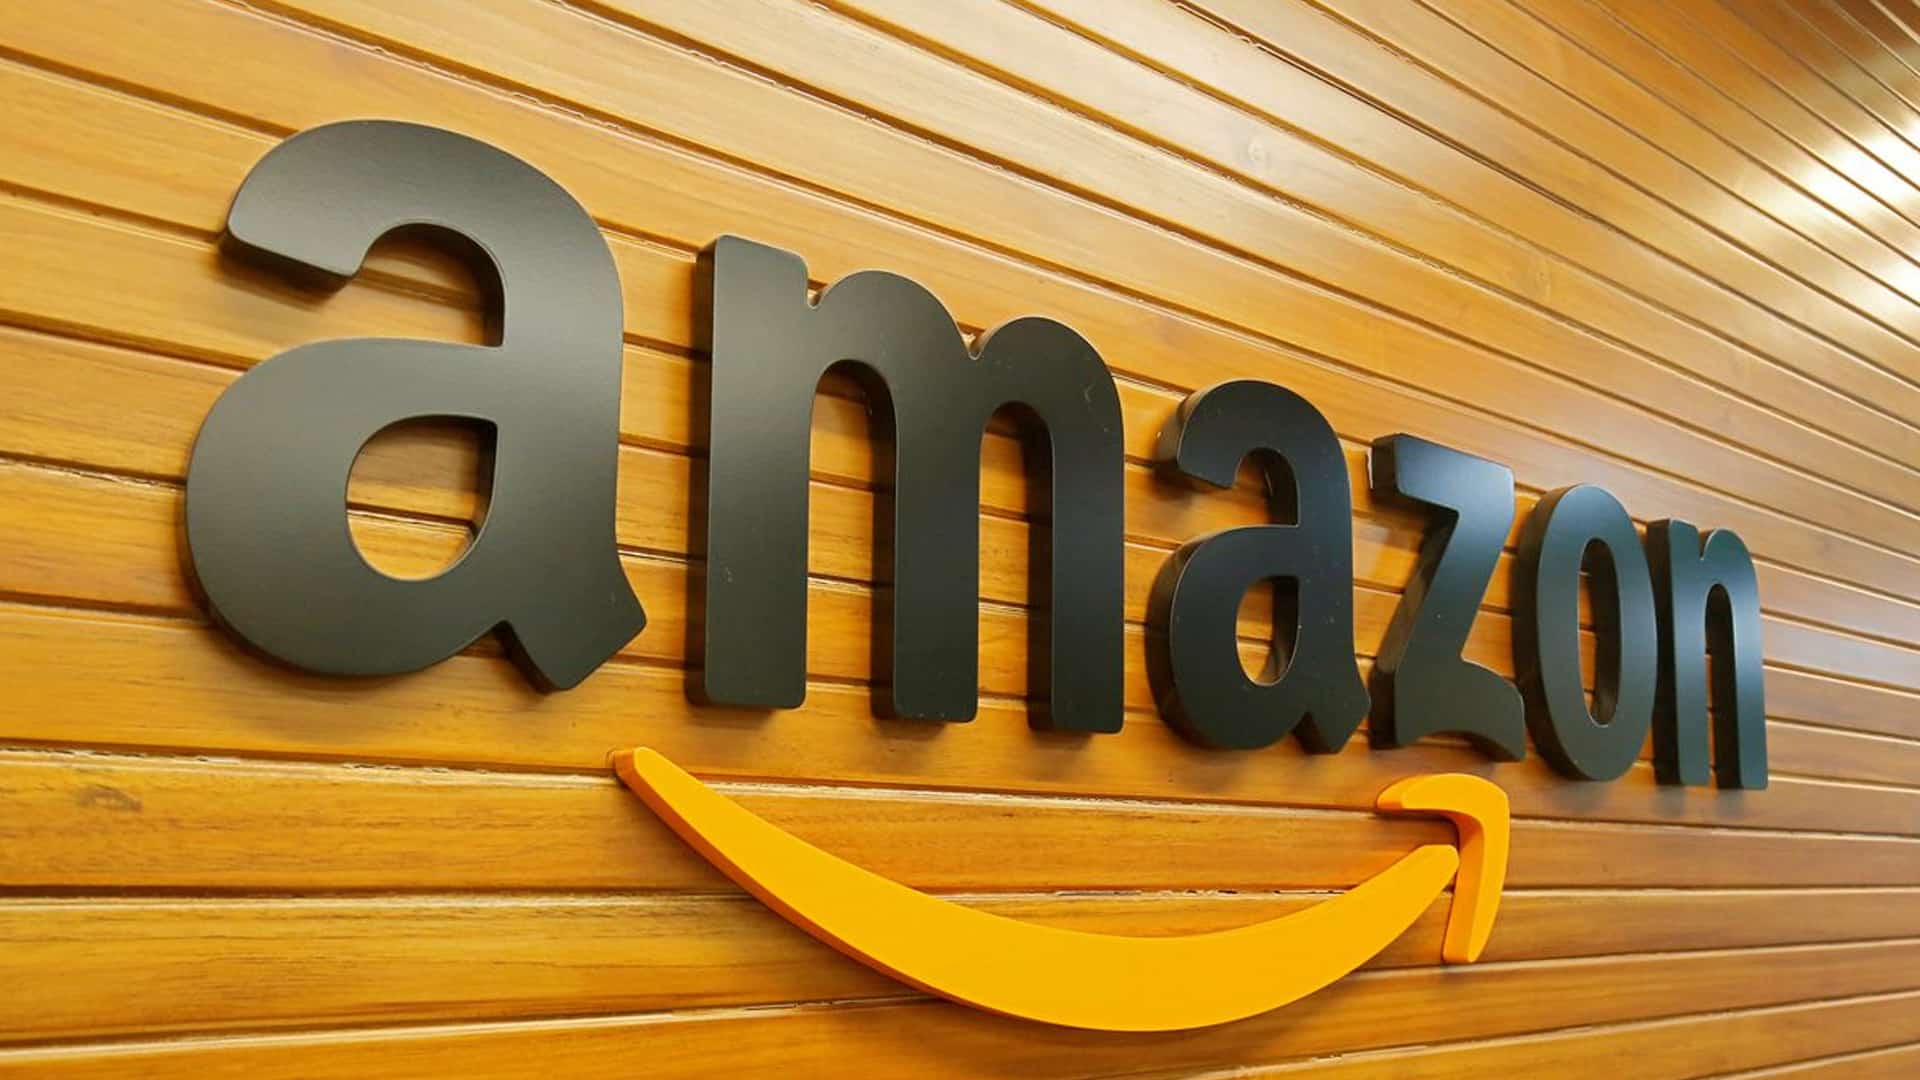 NCLAT to hear Amazon's interim plea to stay CCI order suspending Future Coupons deal approval